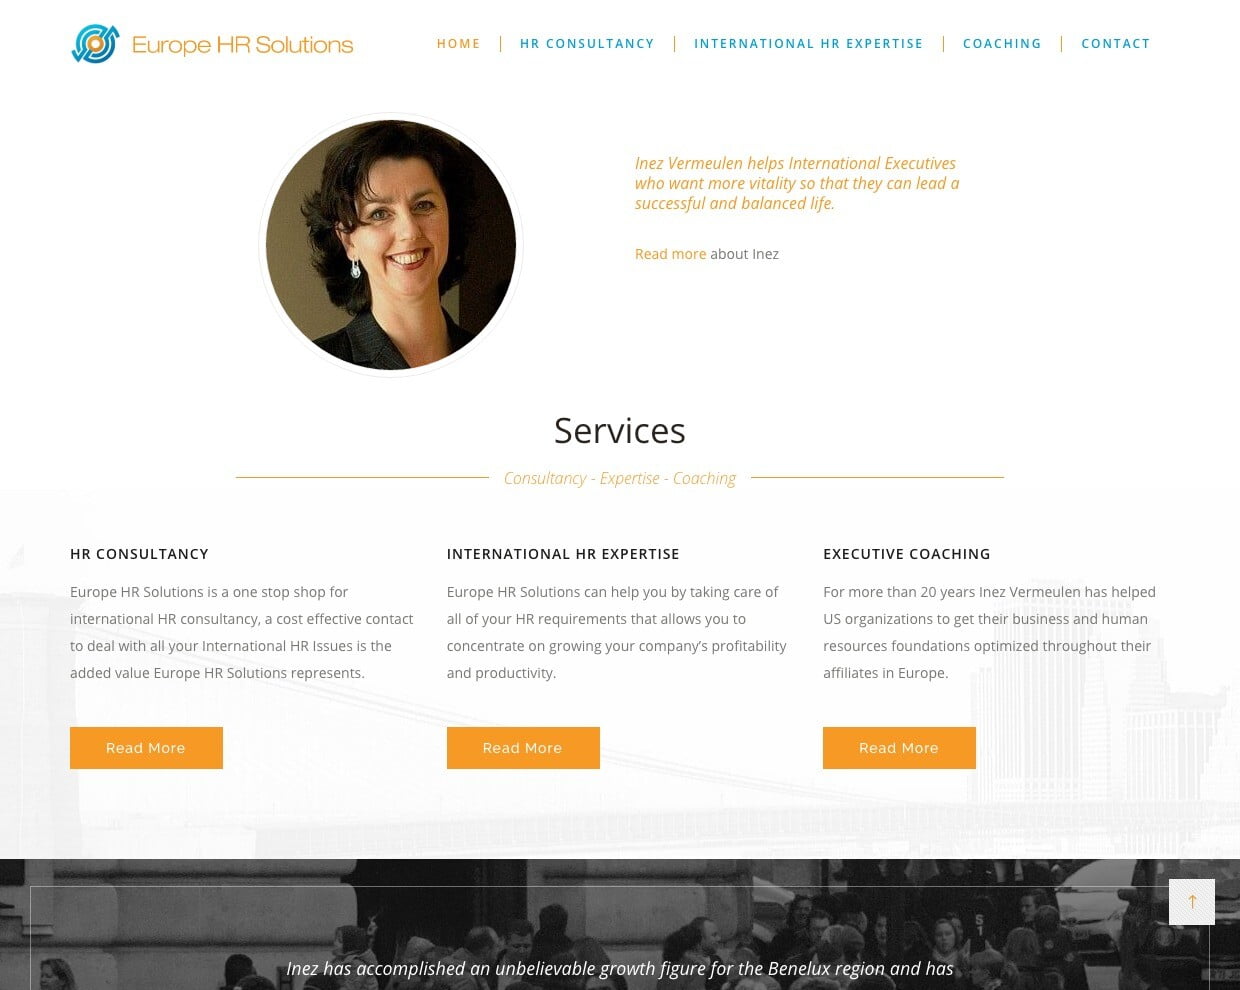 Europe HR Solutions